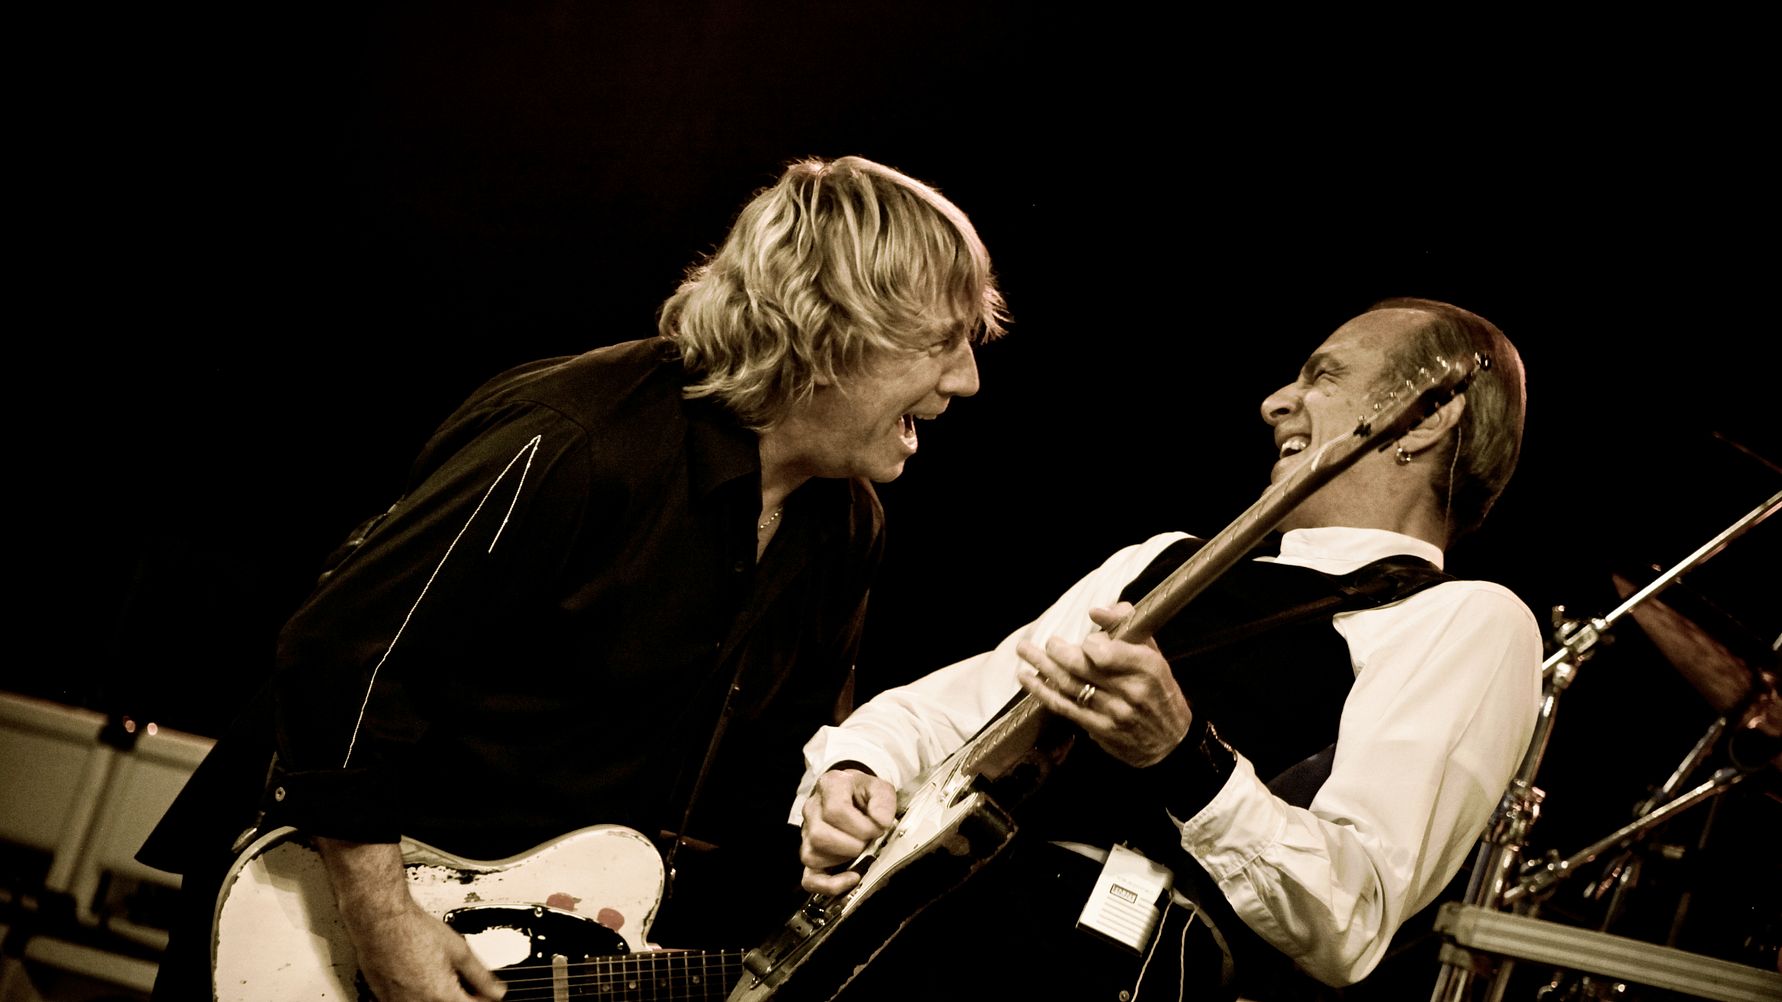 The status quo returns to Gronan after 40 years